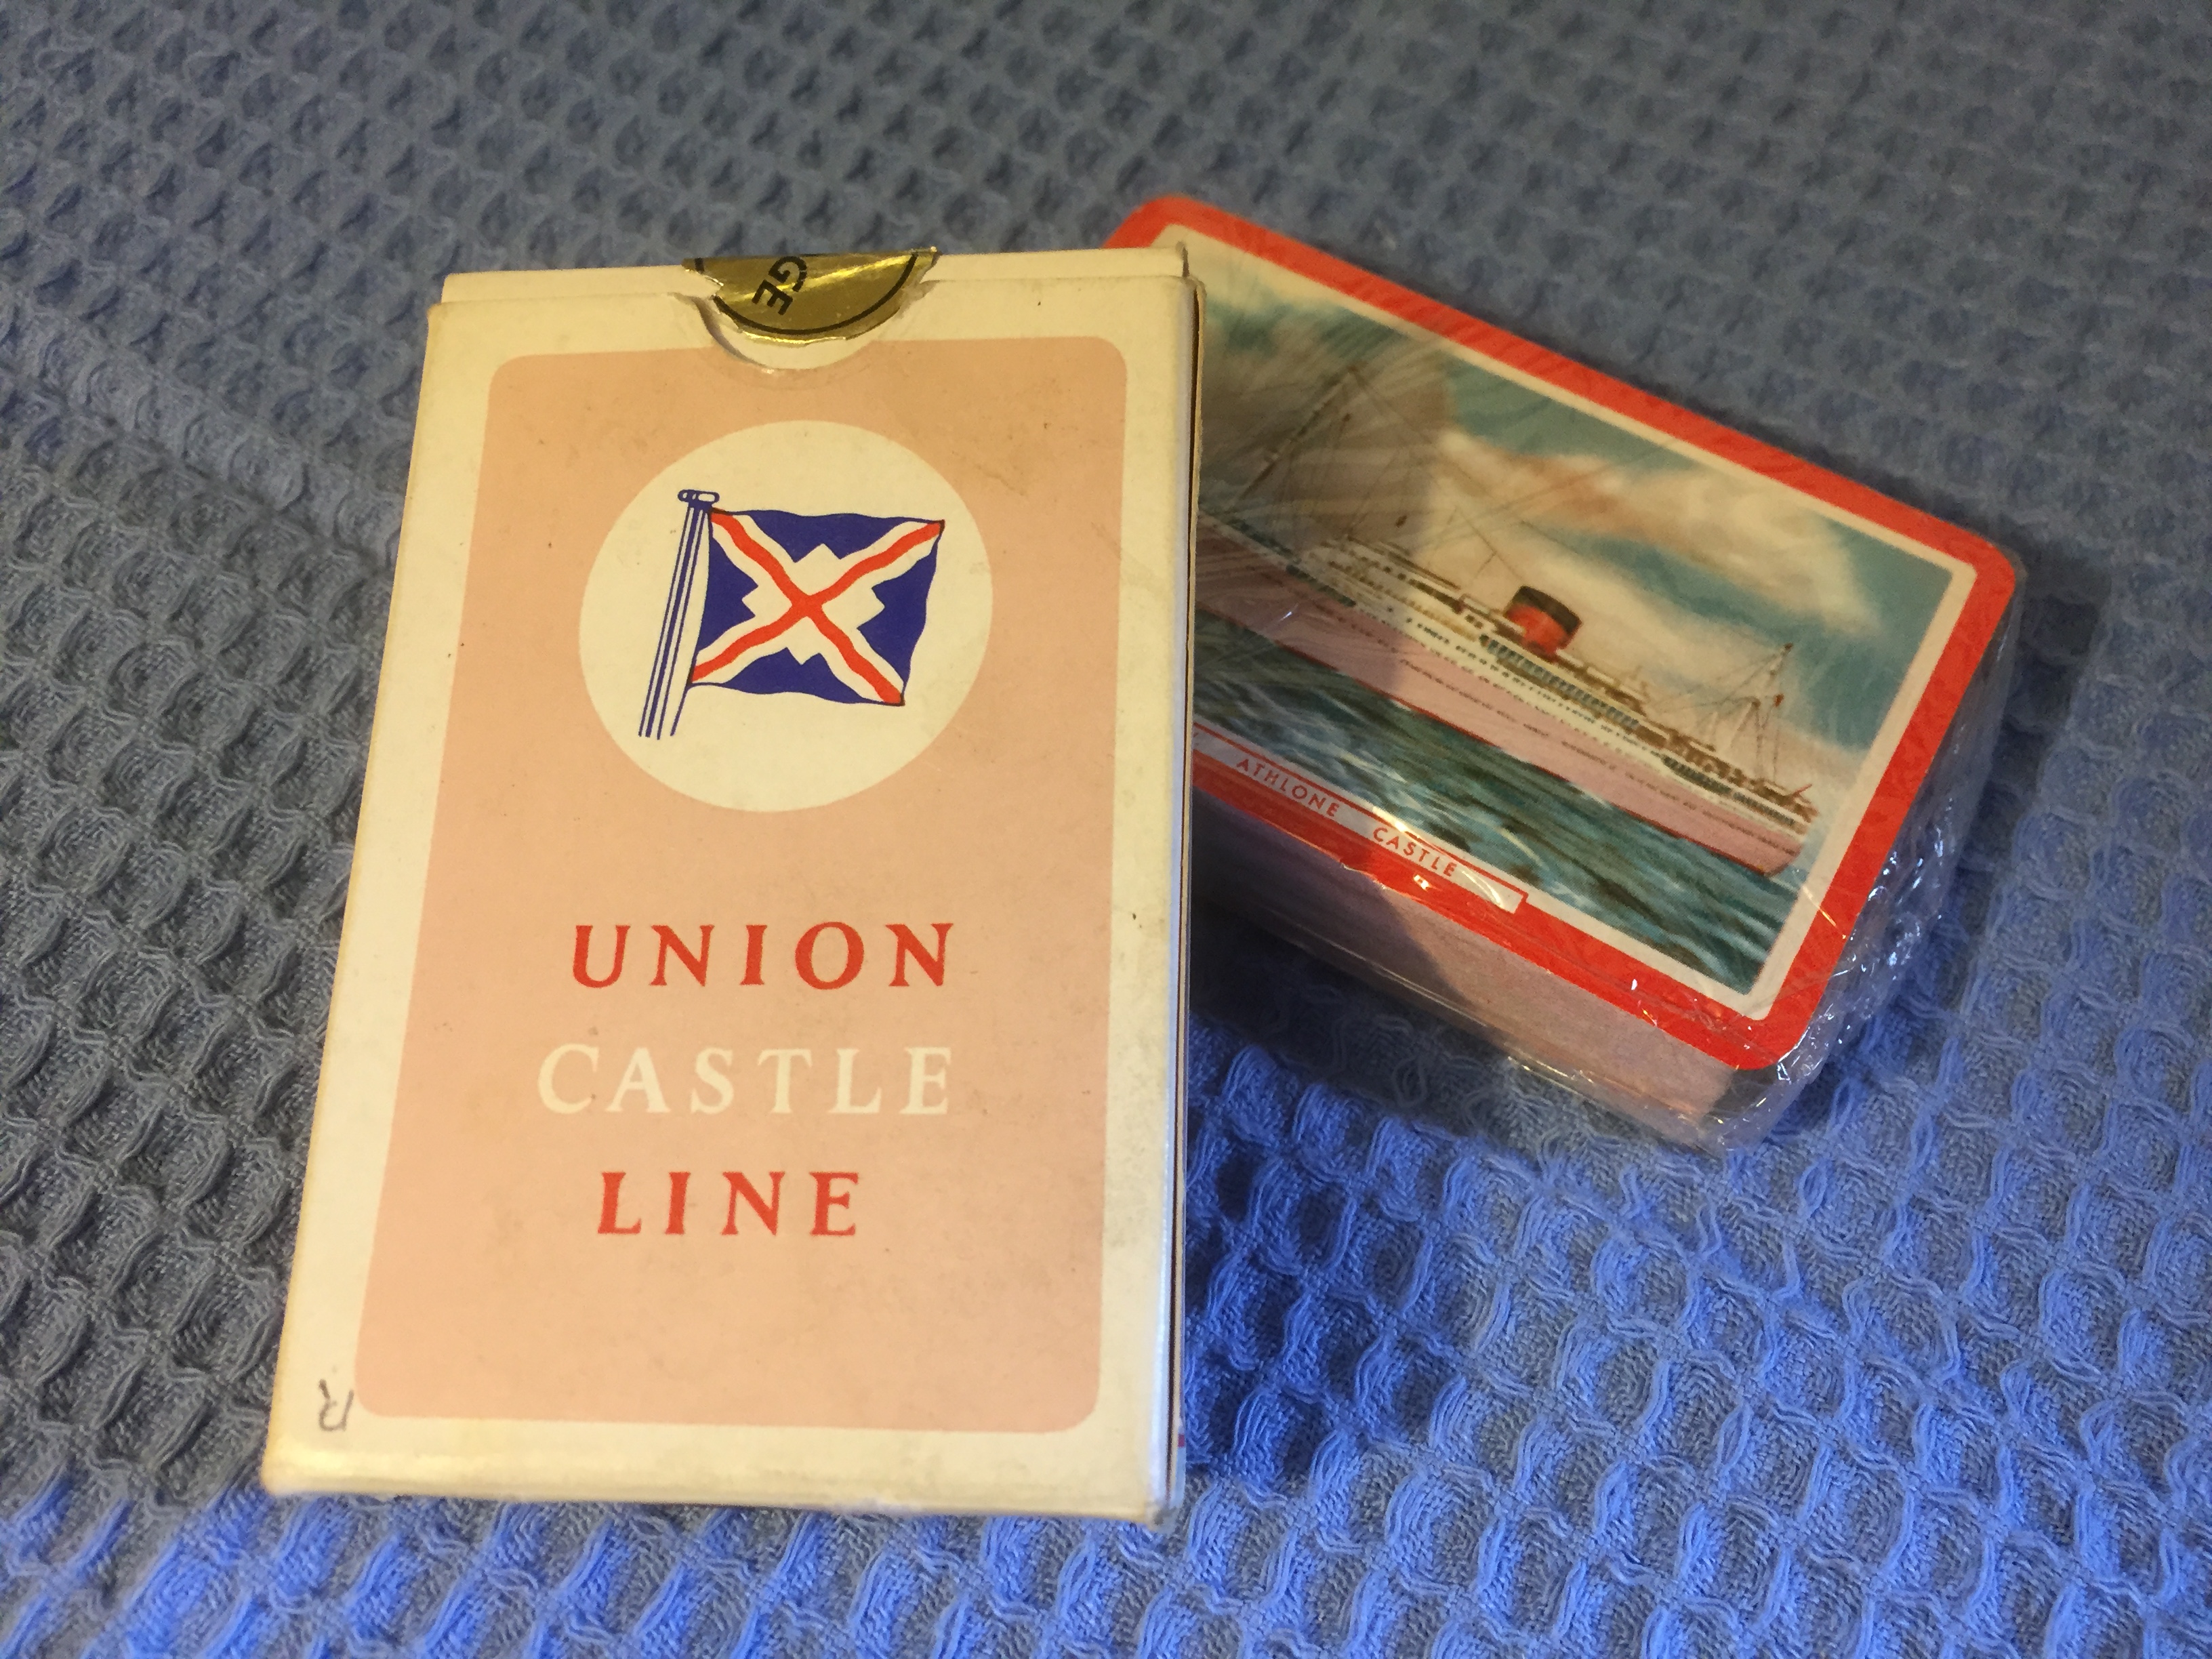 UNOPENED AND UNUSED UNION CASTLE LINE PLAYING CARDS FROM THE VESSEL THE ATHLONE CASTLE